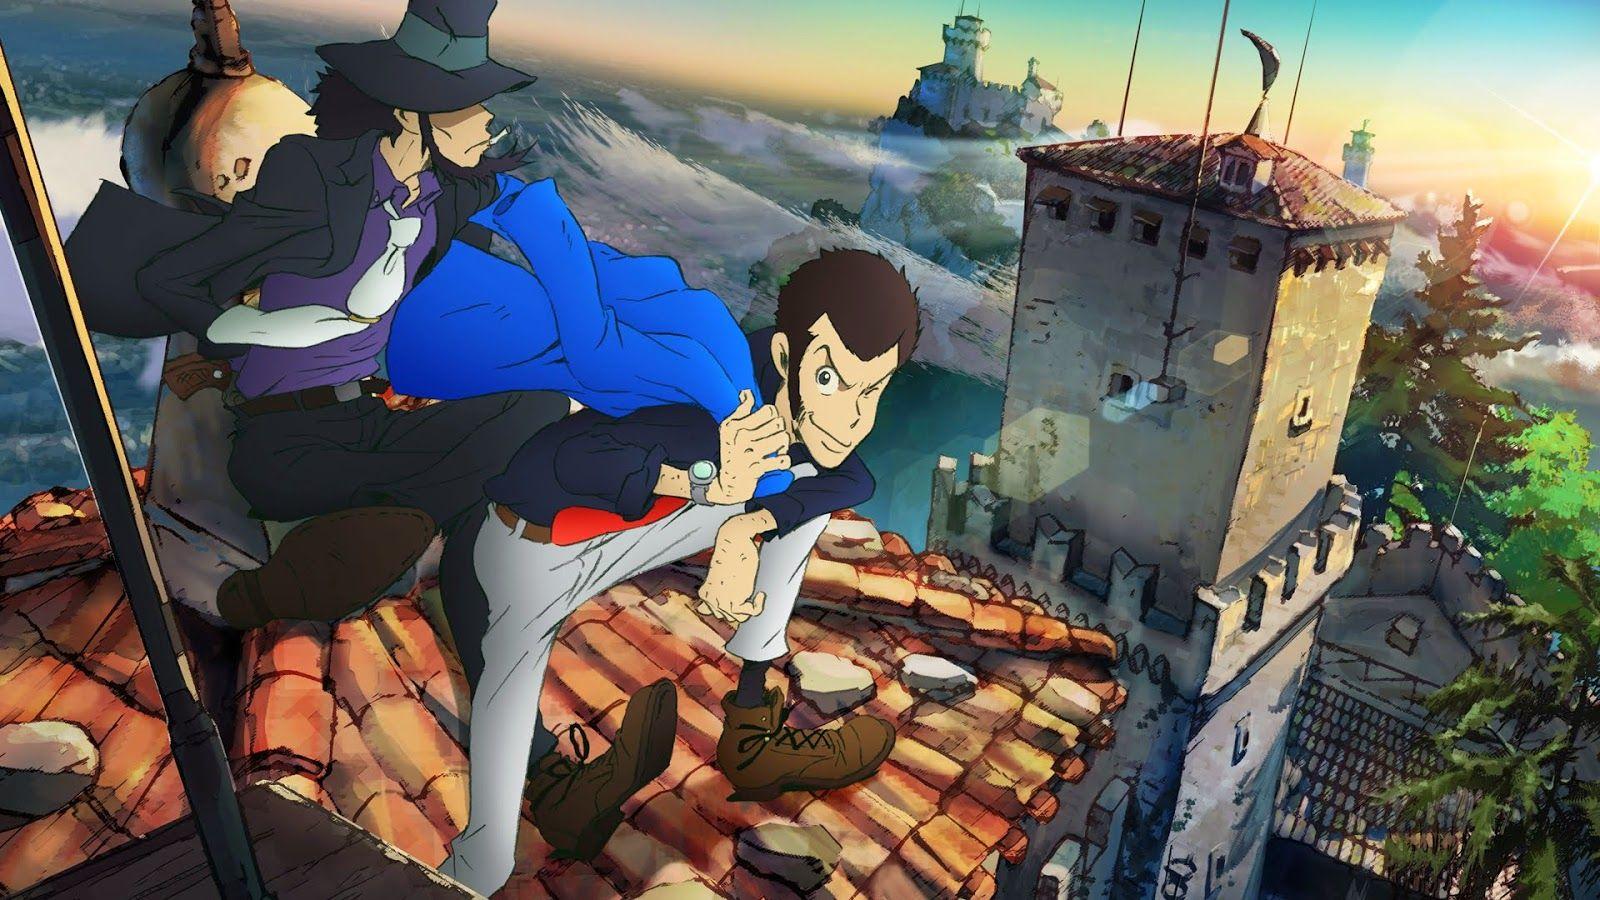 25 Lupin The Third Wallpapers for iPhone and Android by Rita Rodriguez